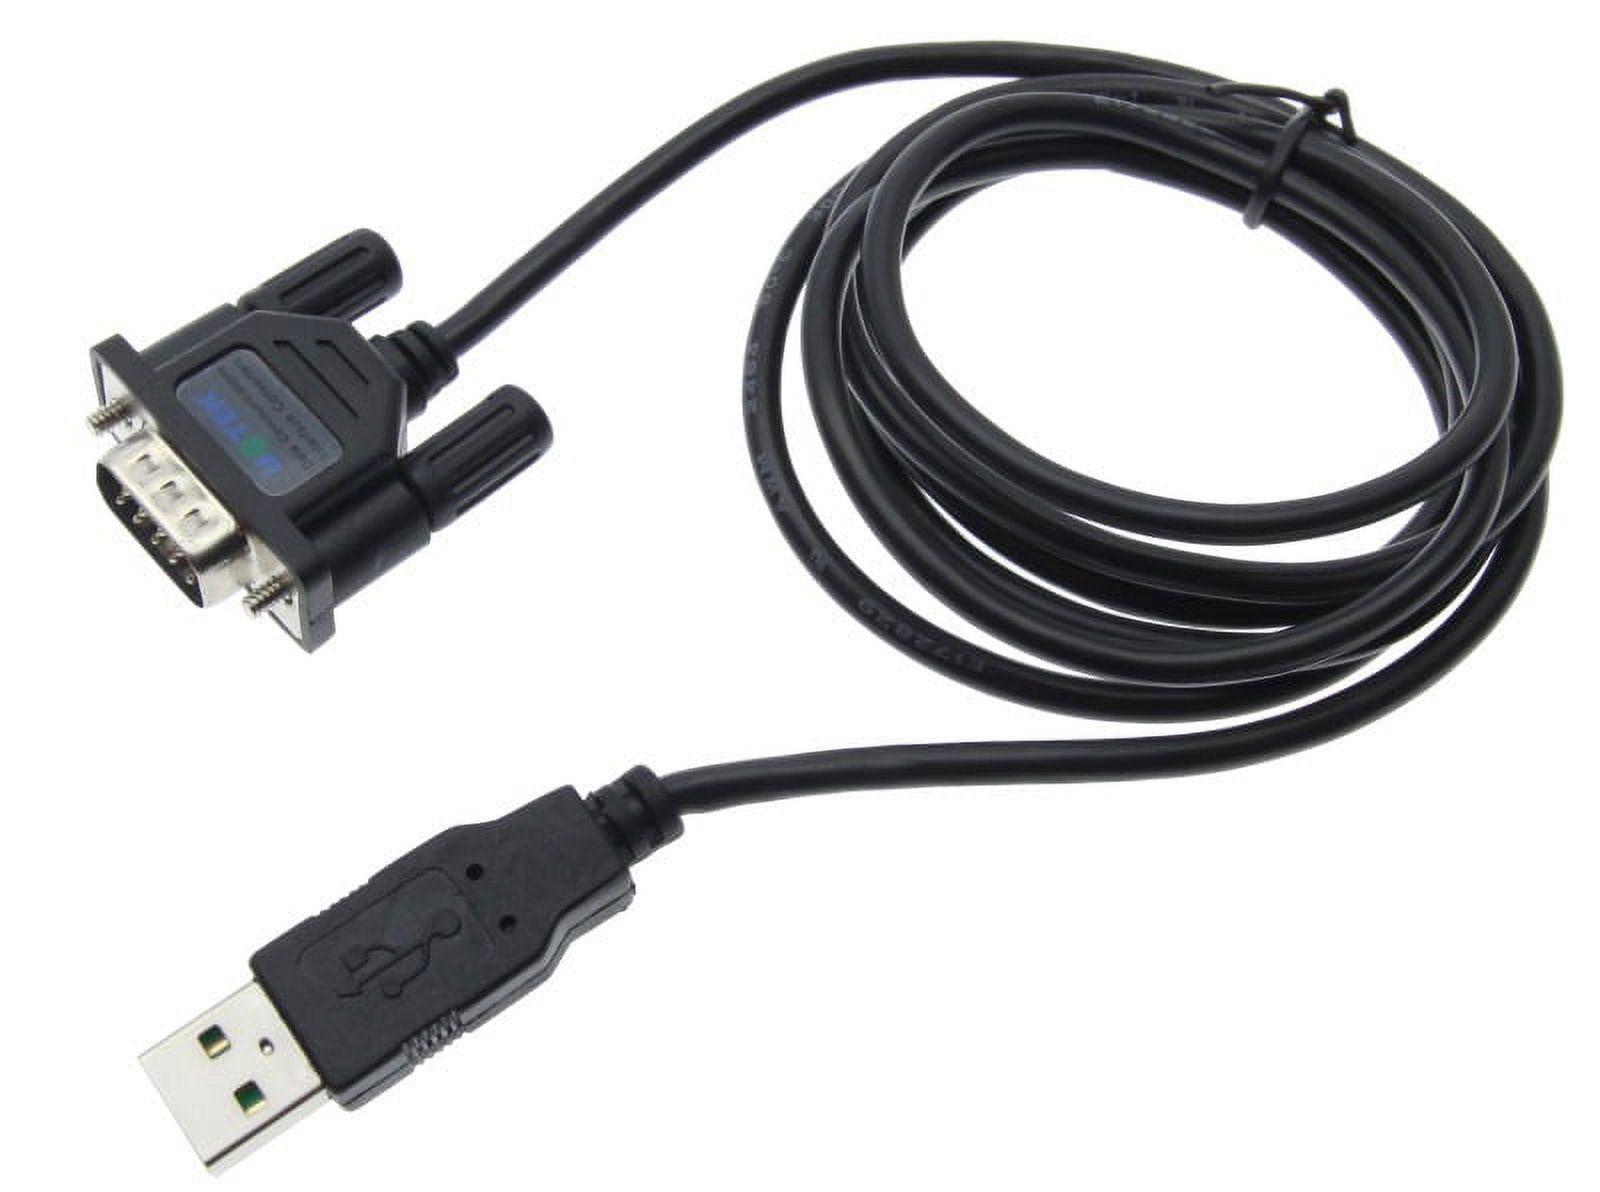 Gearmo 36inch FTDI USB to Serial Cable for MA PC Linux with Windows 10 Certified Drivers - image 2 of 3